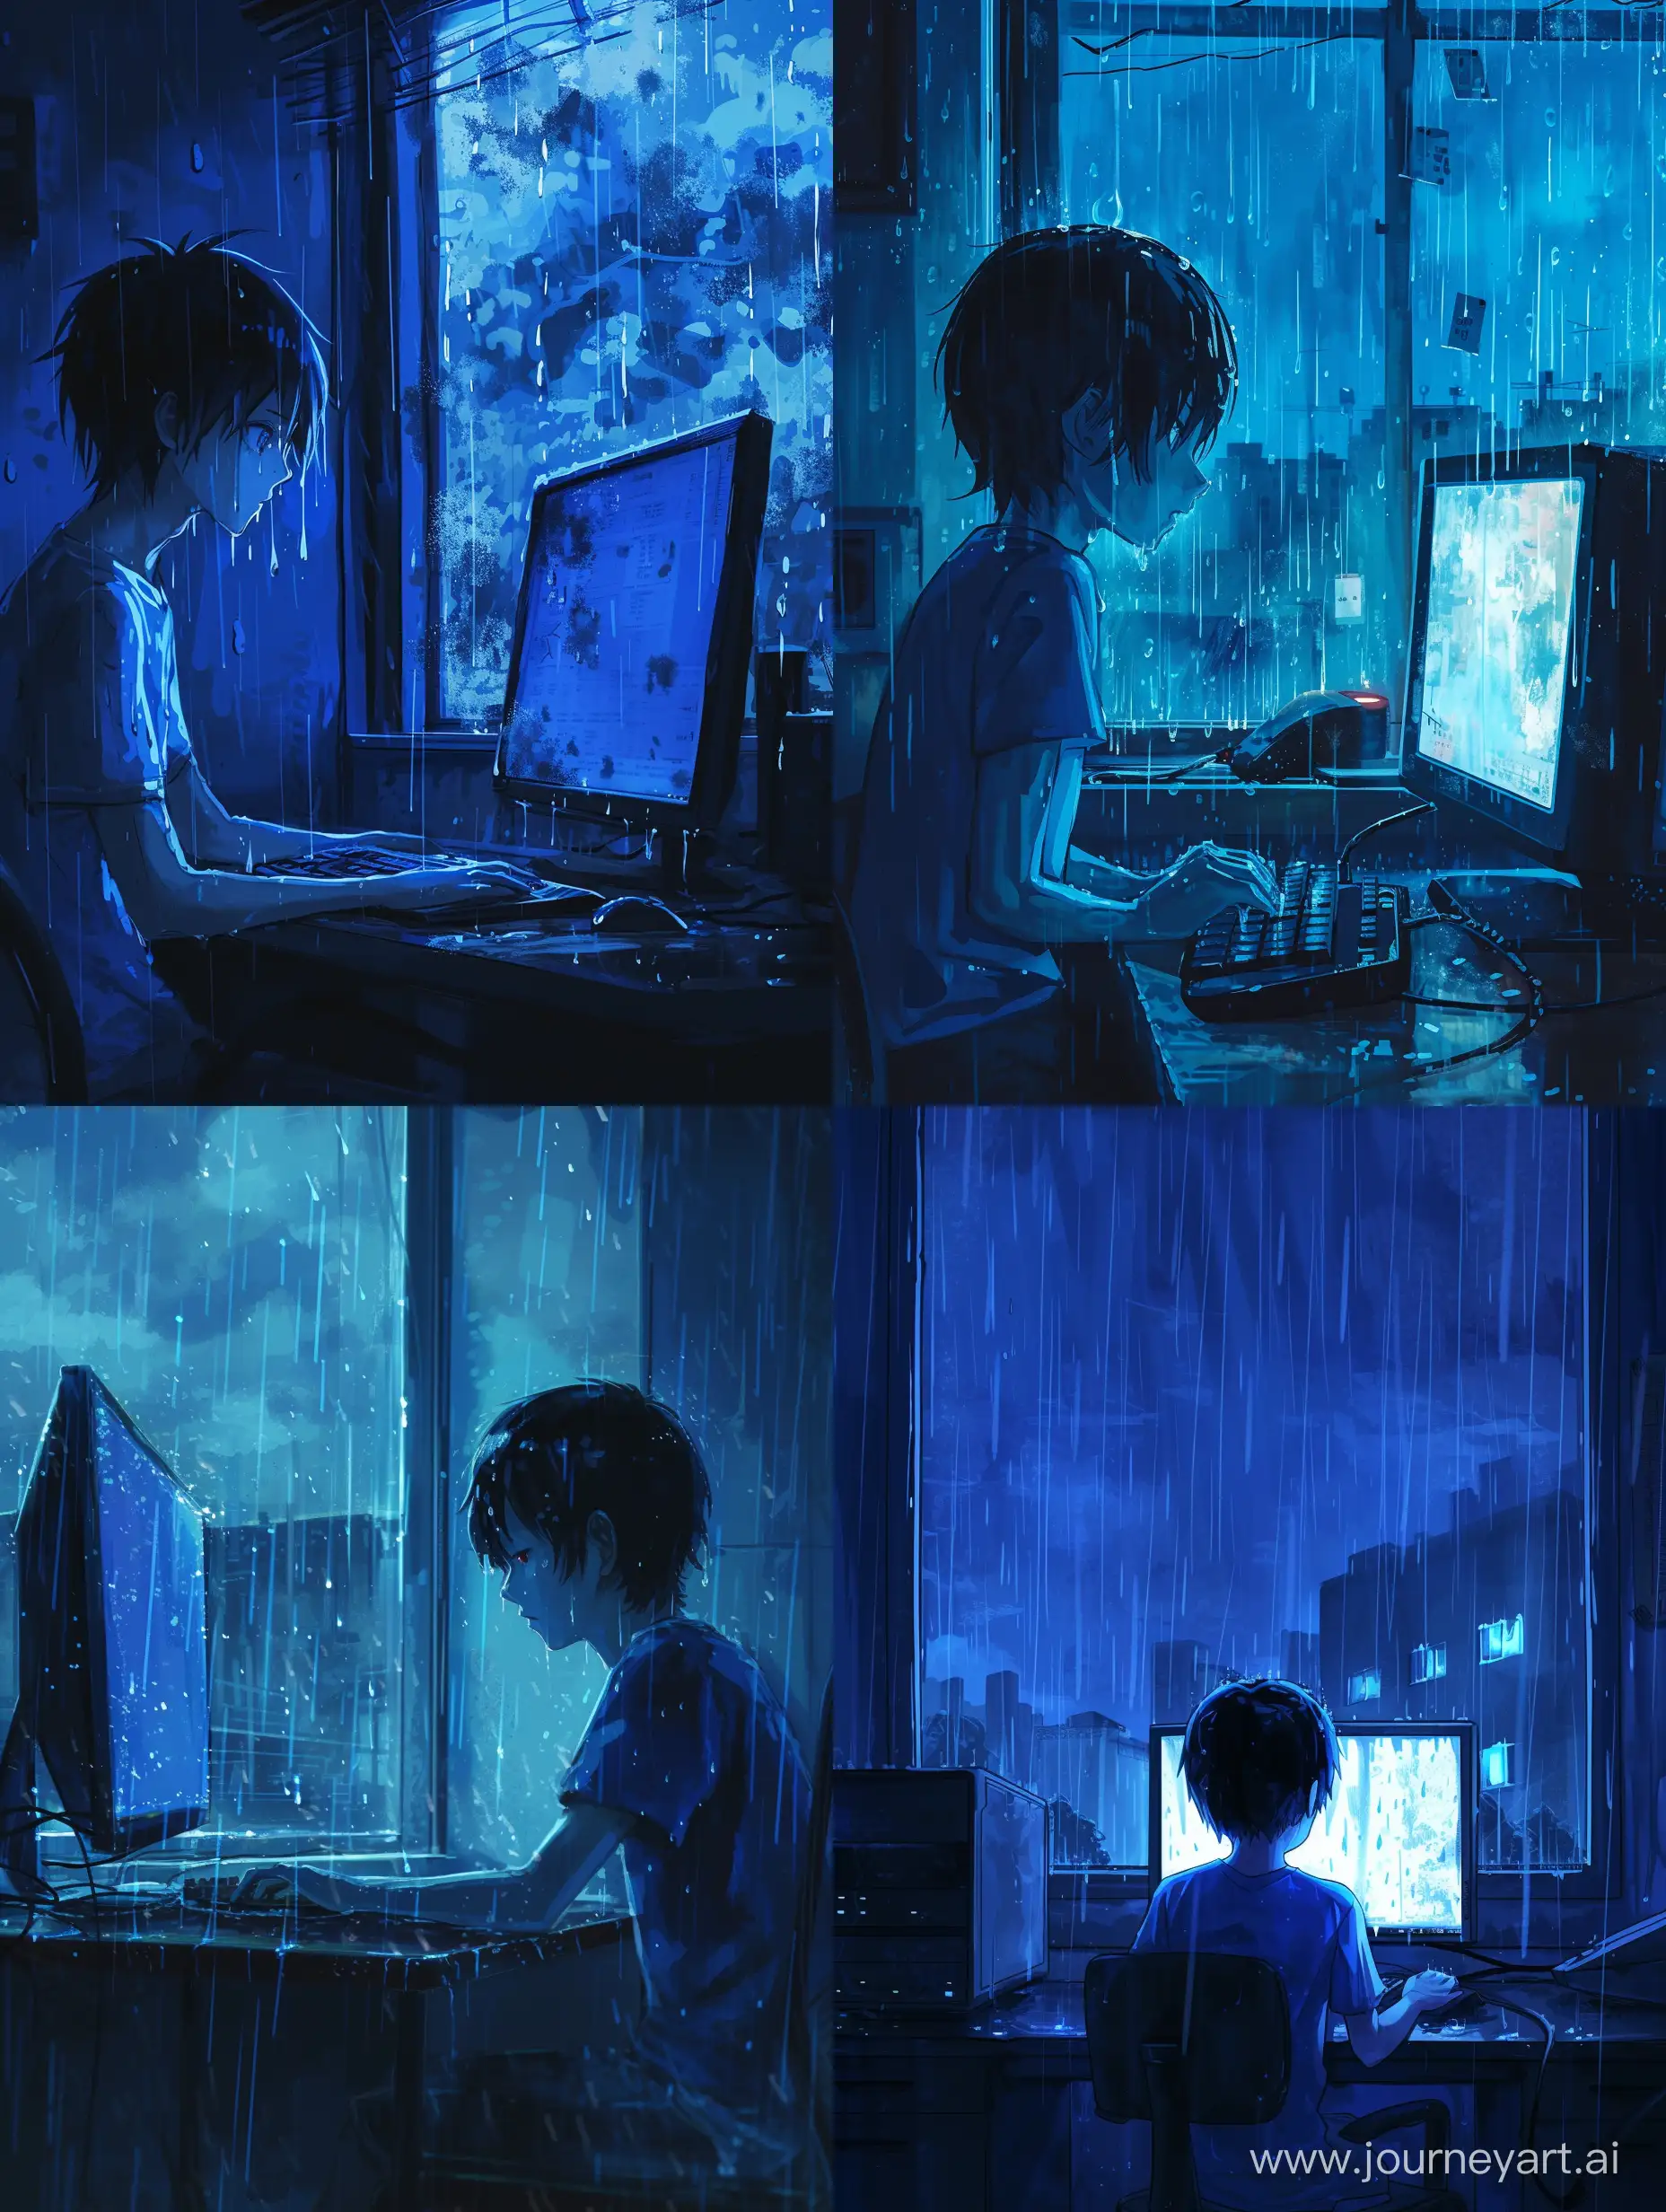 anime style, boy 16 years old and computer, despair, rain outside the window, blue tones, dark room.